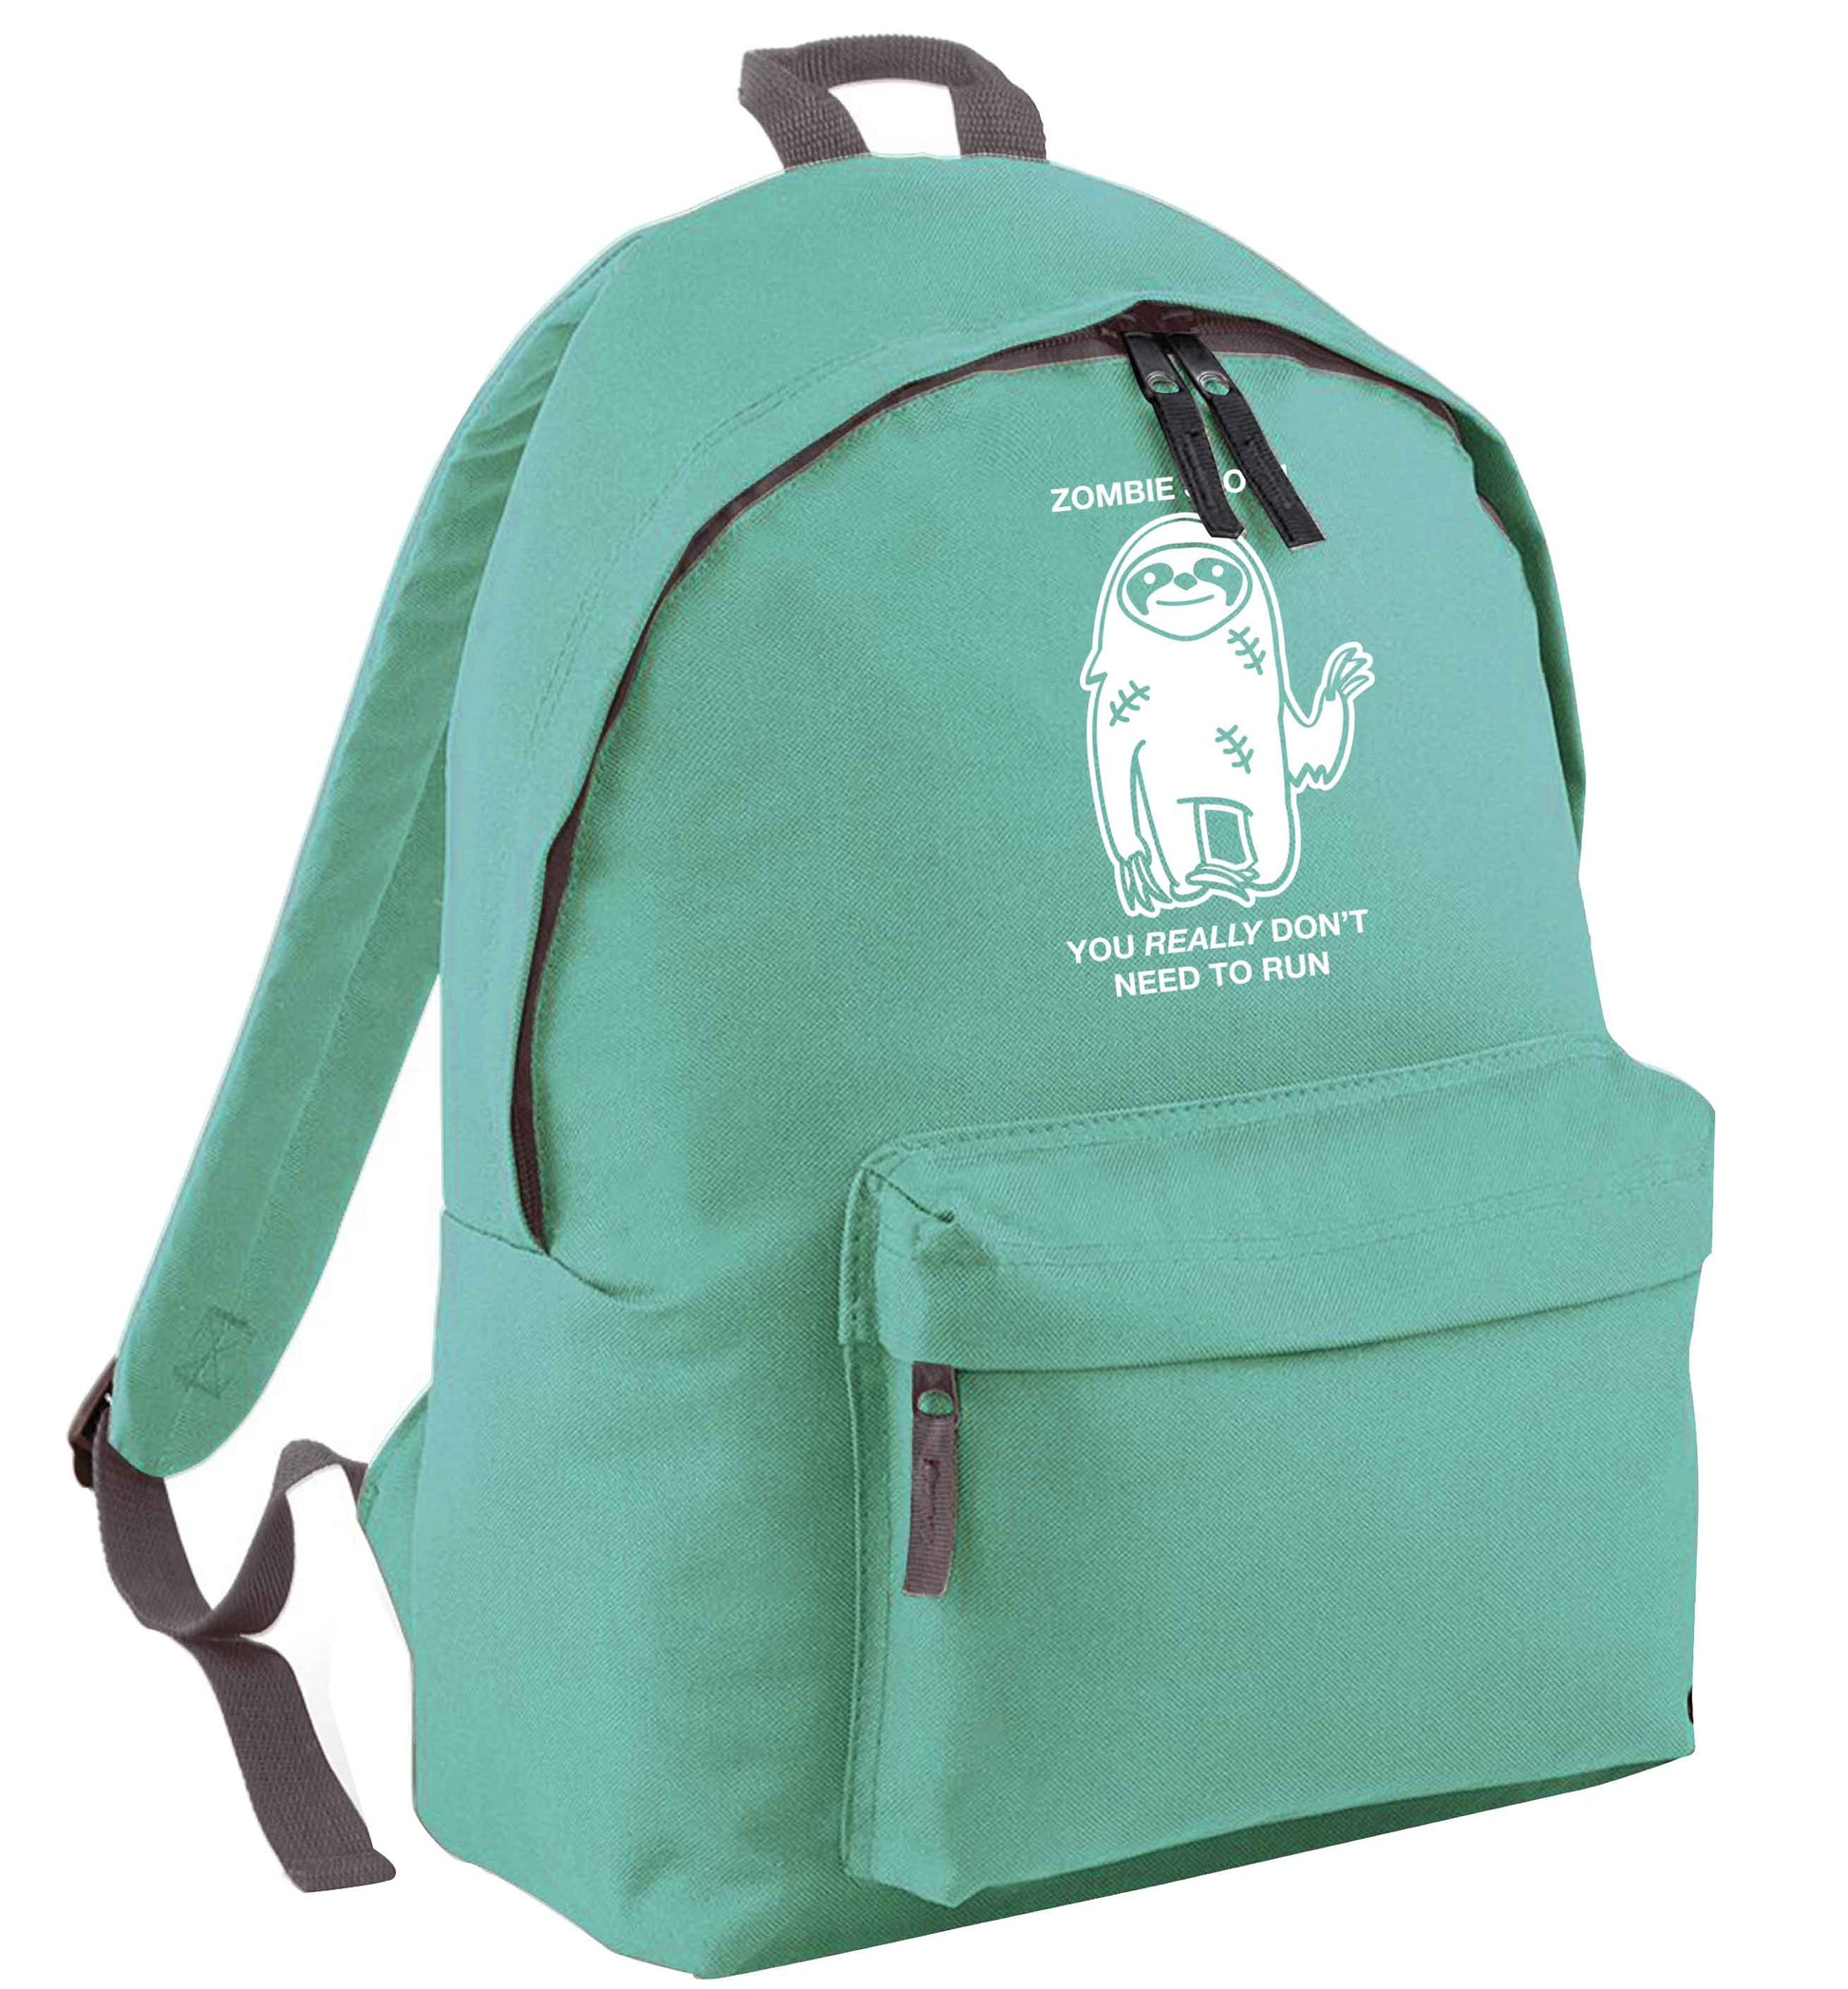 Zombie sloth you really don't need to run mint adults backpack